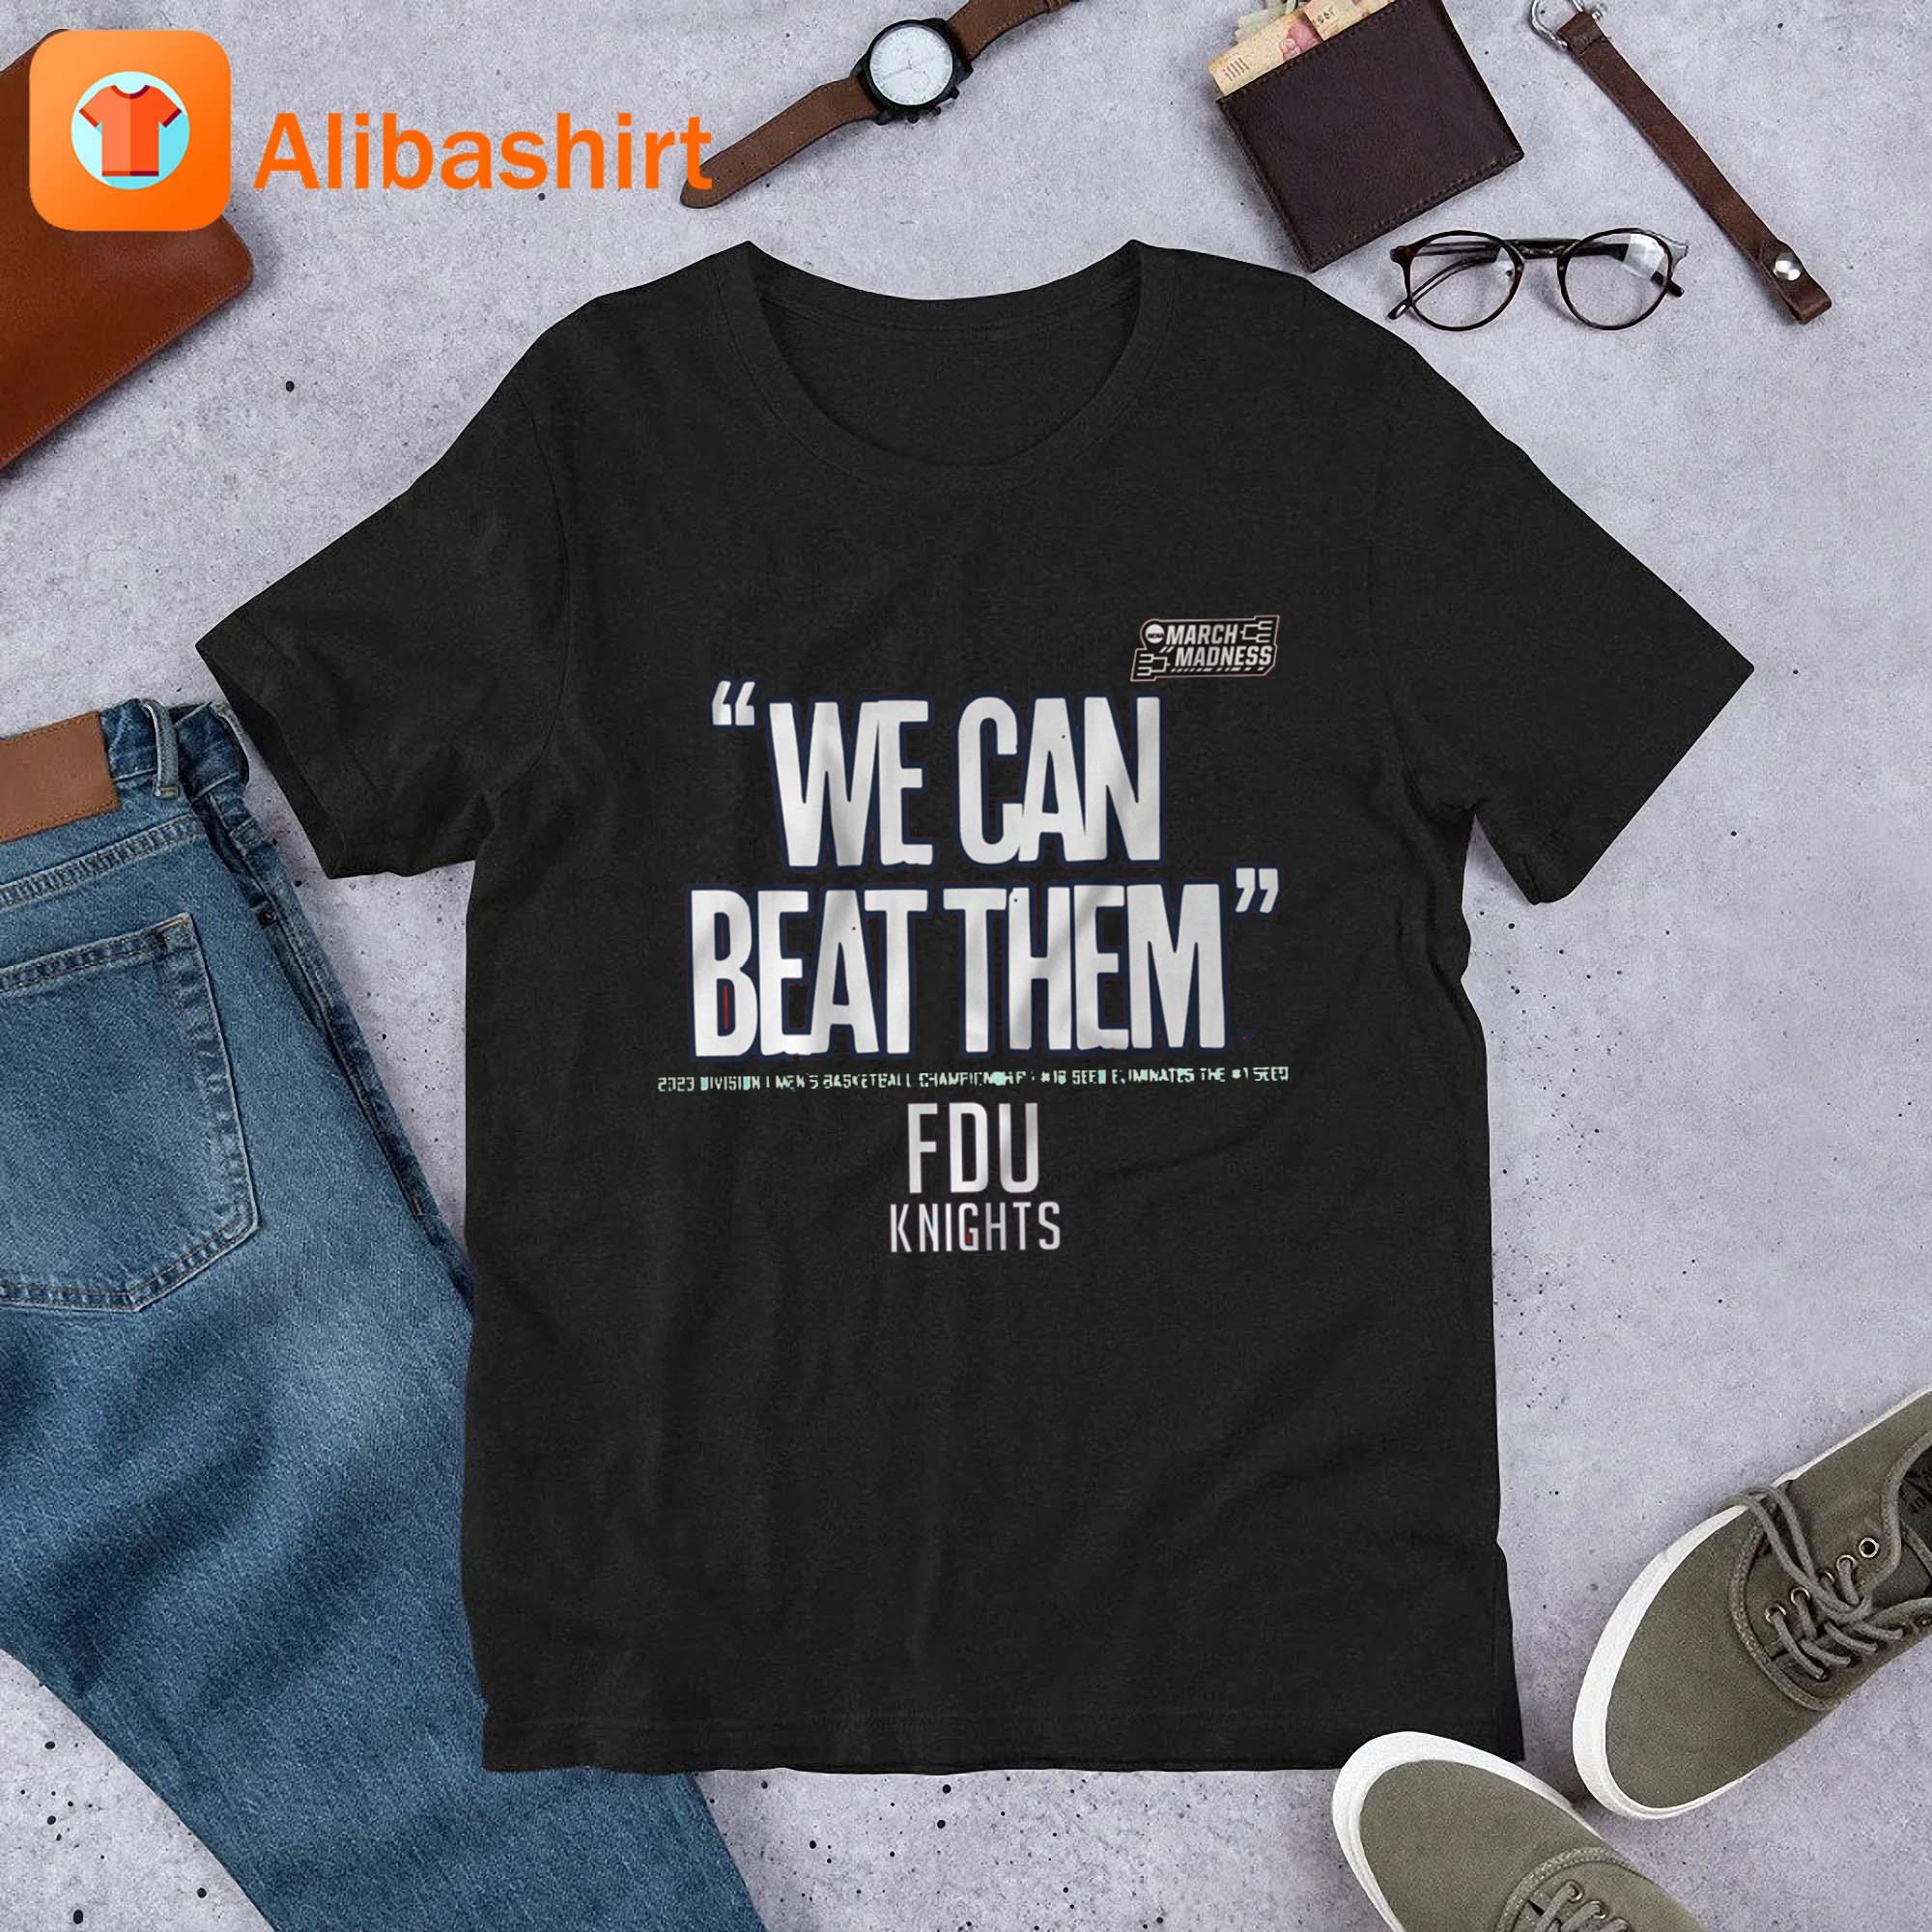 Fairleigh Dickinson Knights We Can Beat Them 2023 Division I Men's Basketball Championship shirt